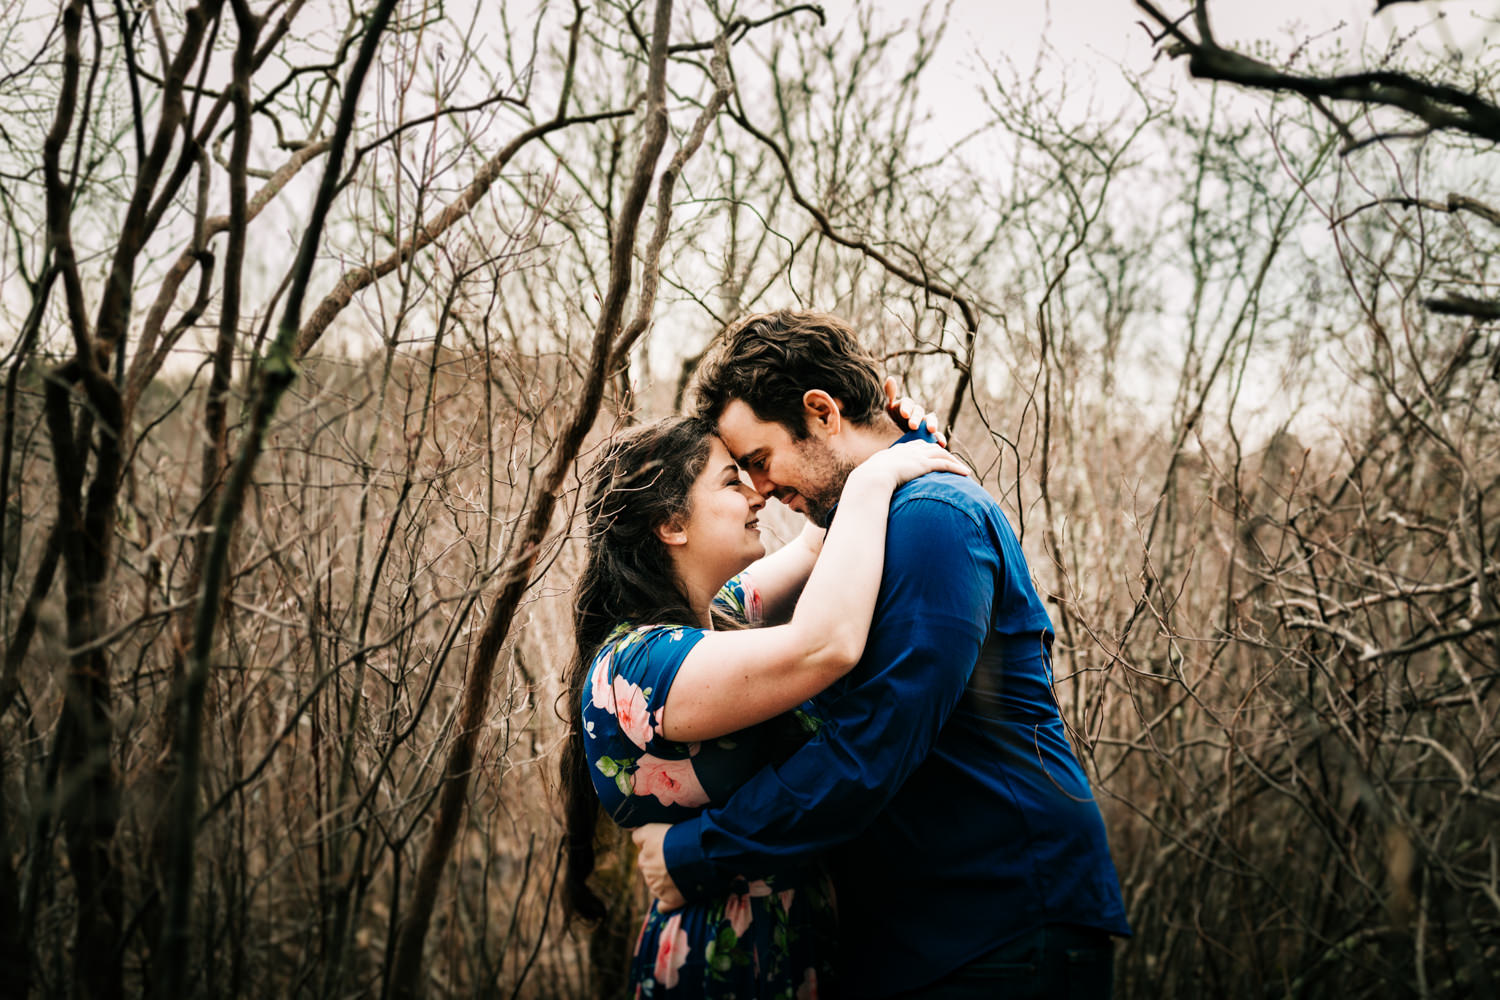 Couple embracing in brambles of forest in Massachusetts